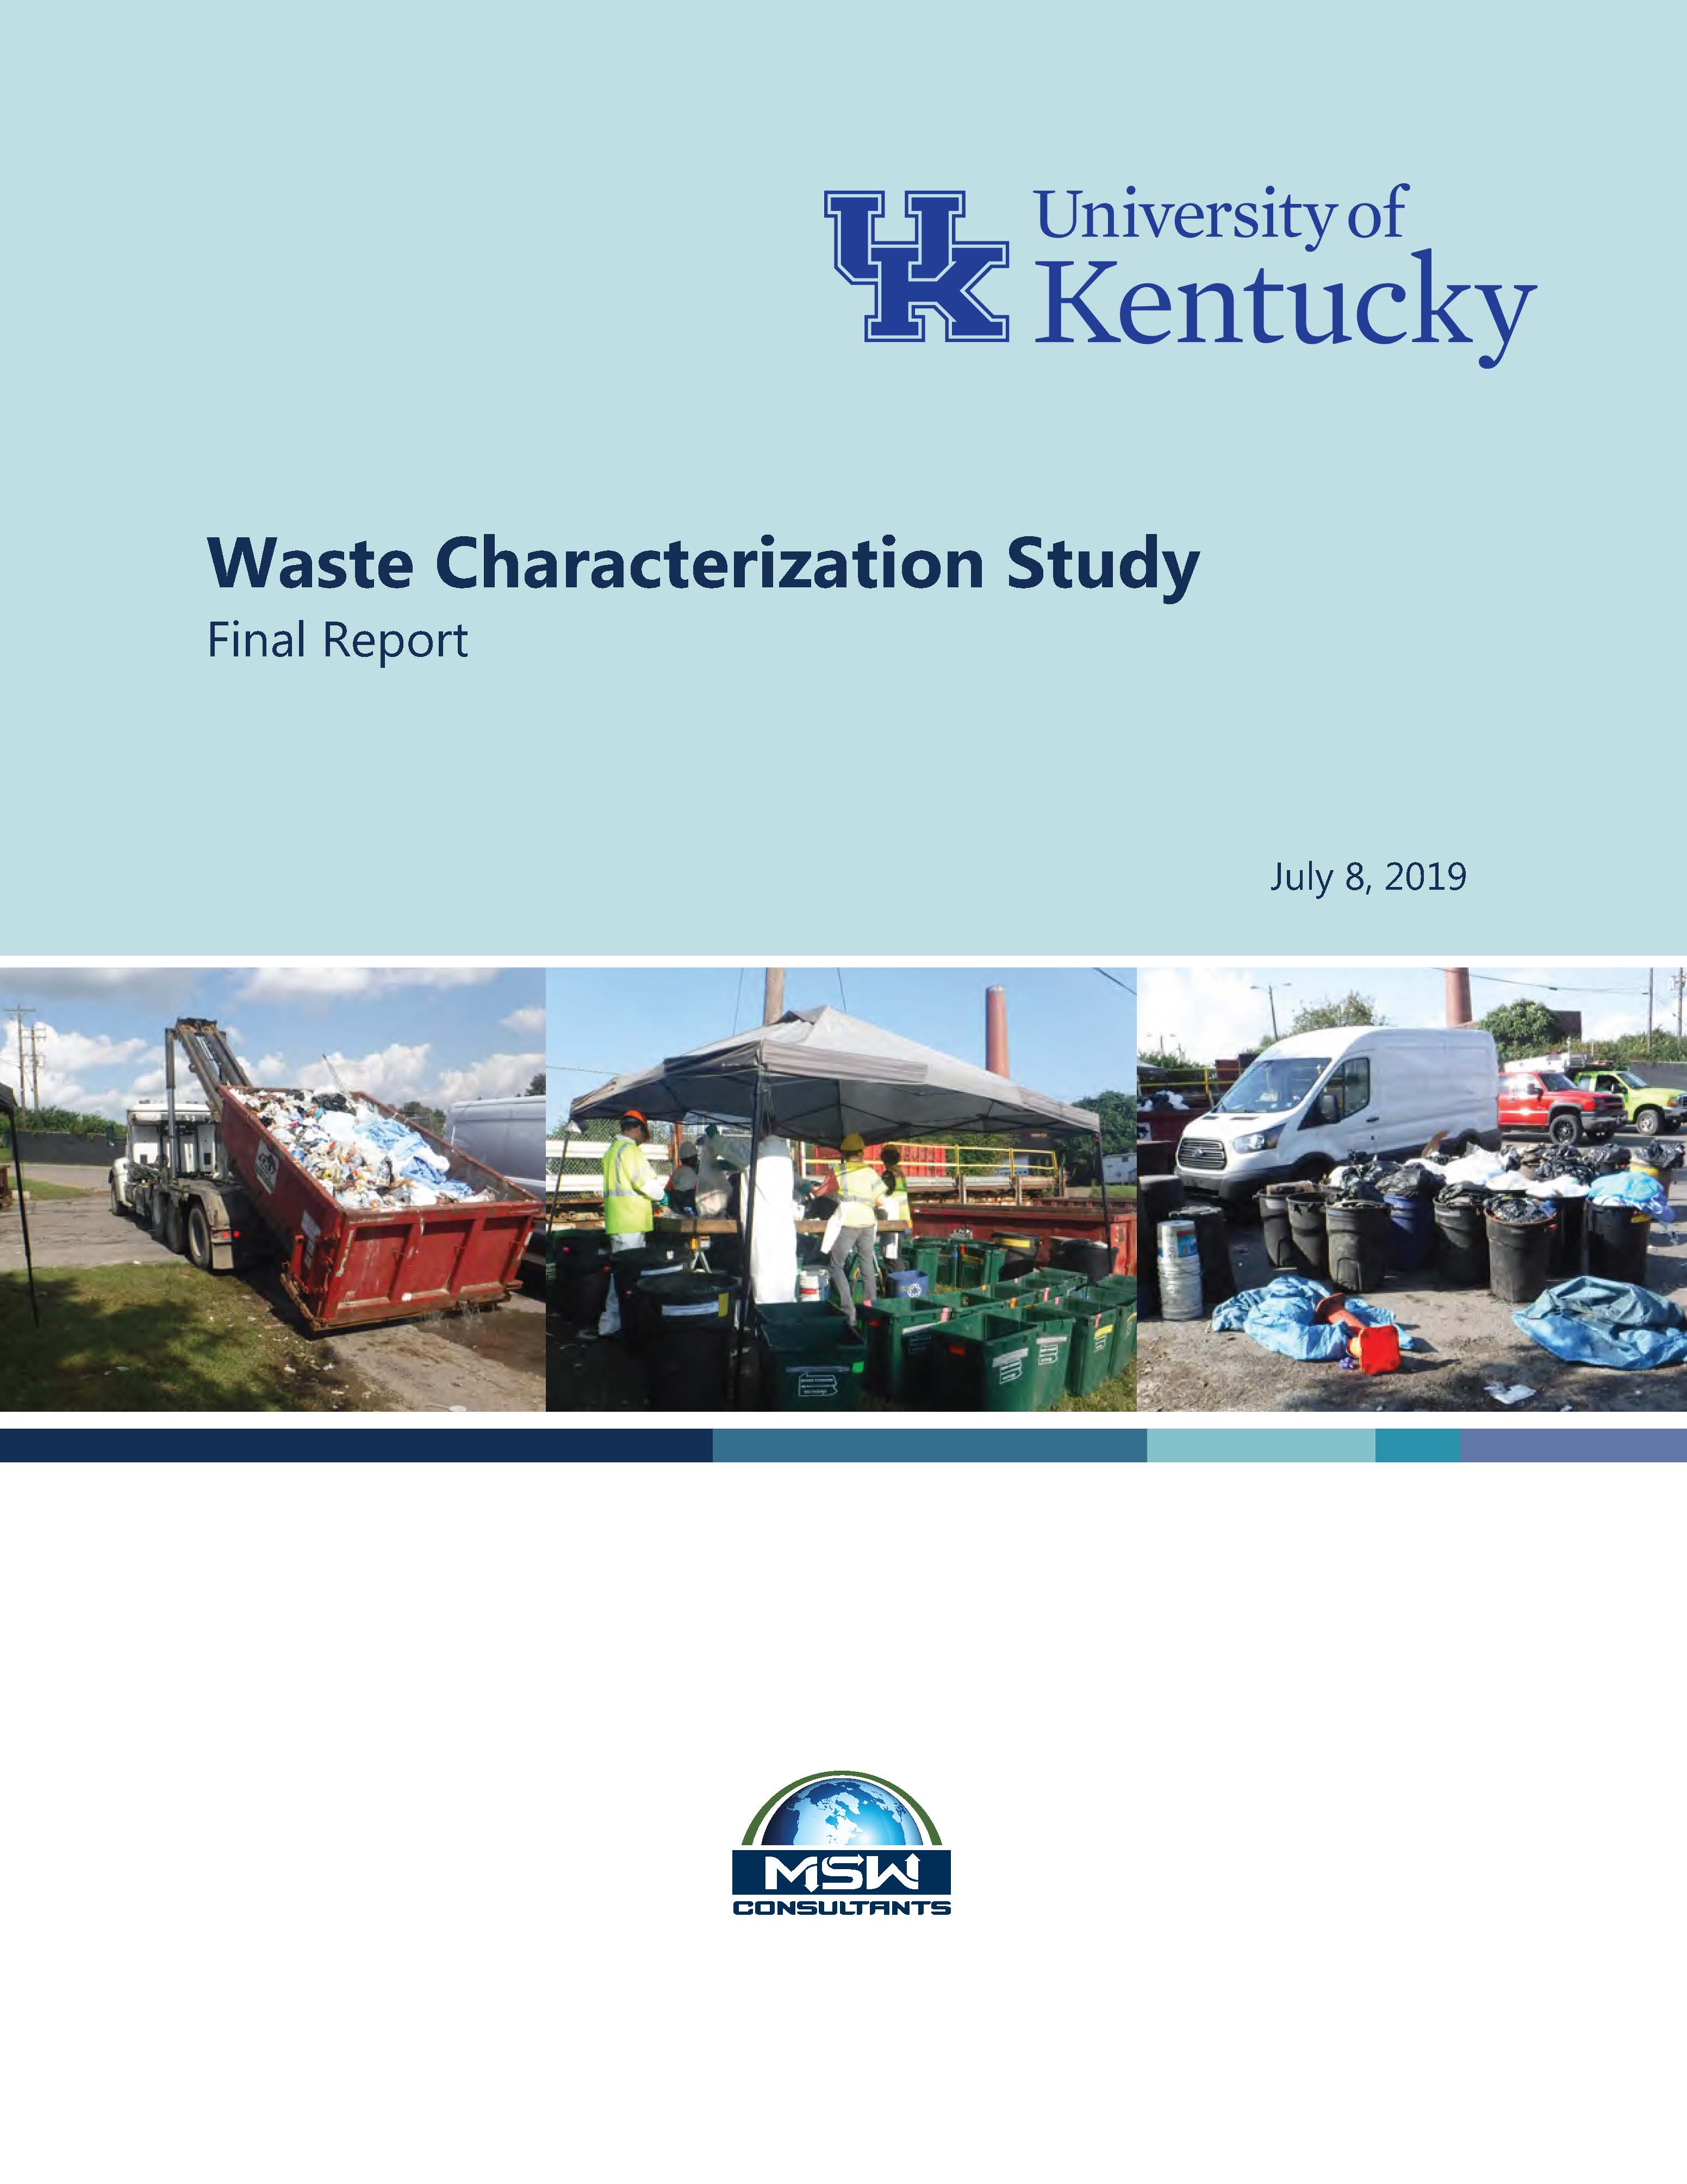 Front cover of the 2018 Waste Characterization Study report for University of Kentucky Recycling department conducted by MSW Consultants 